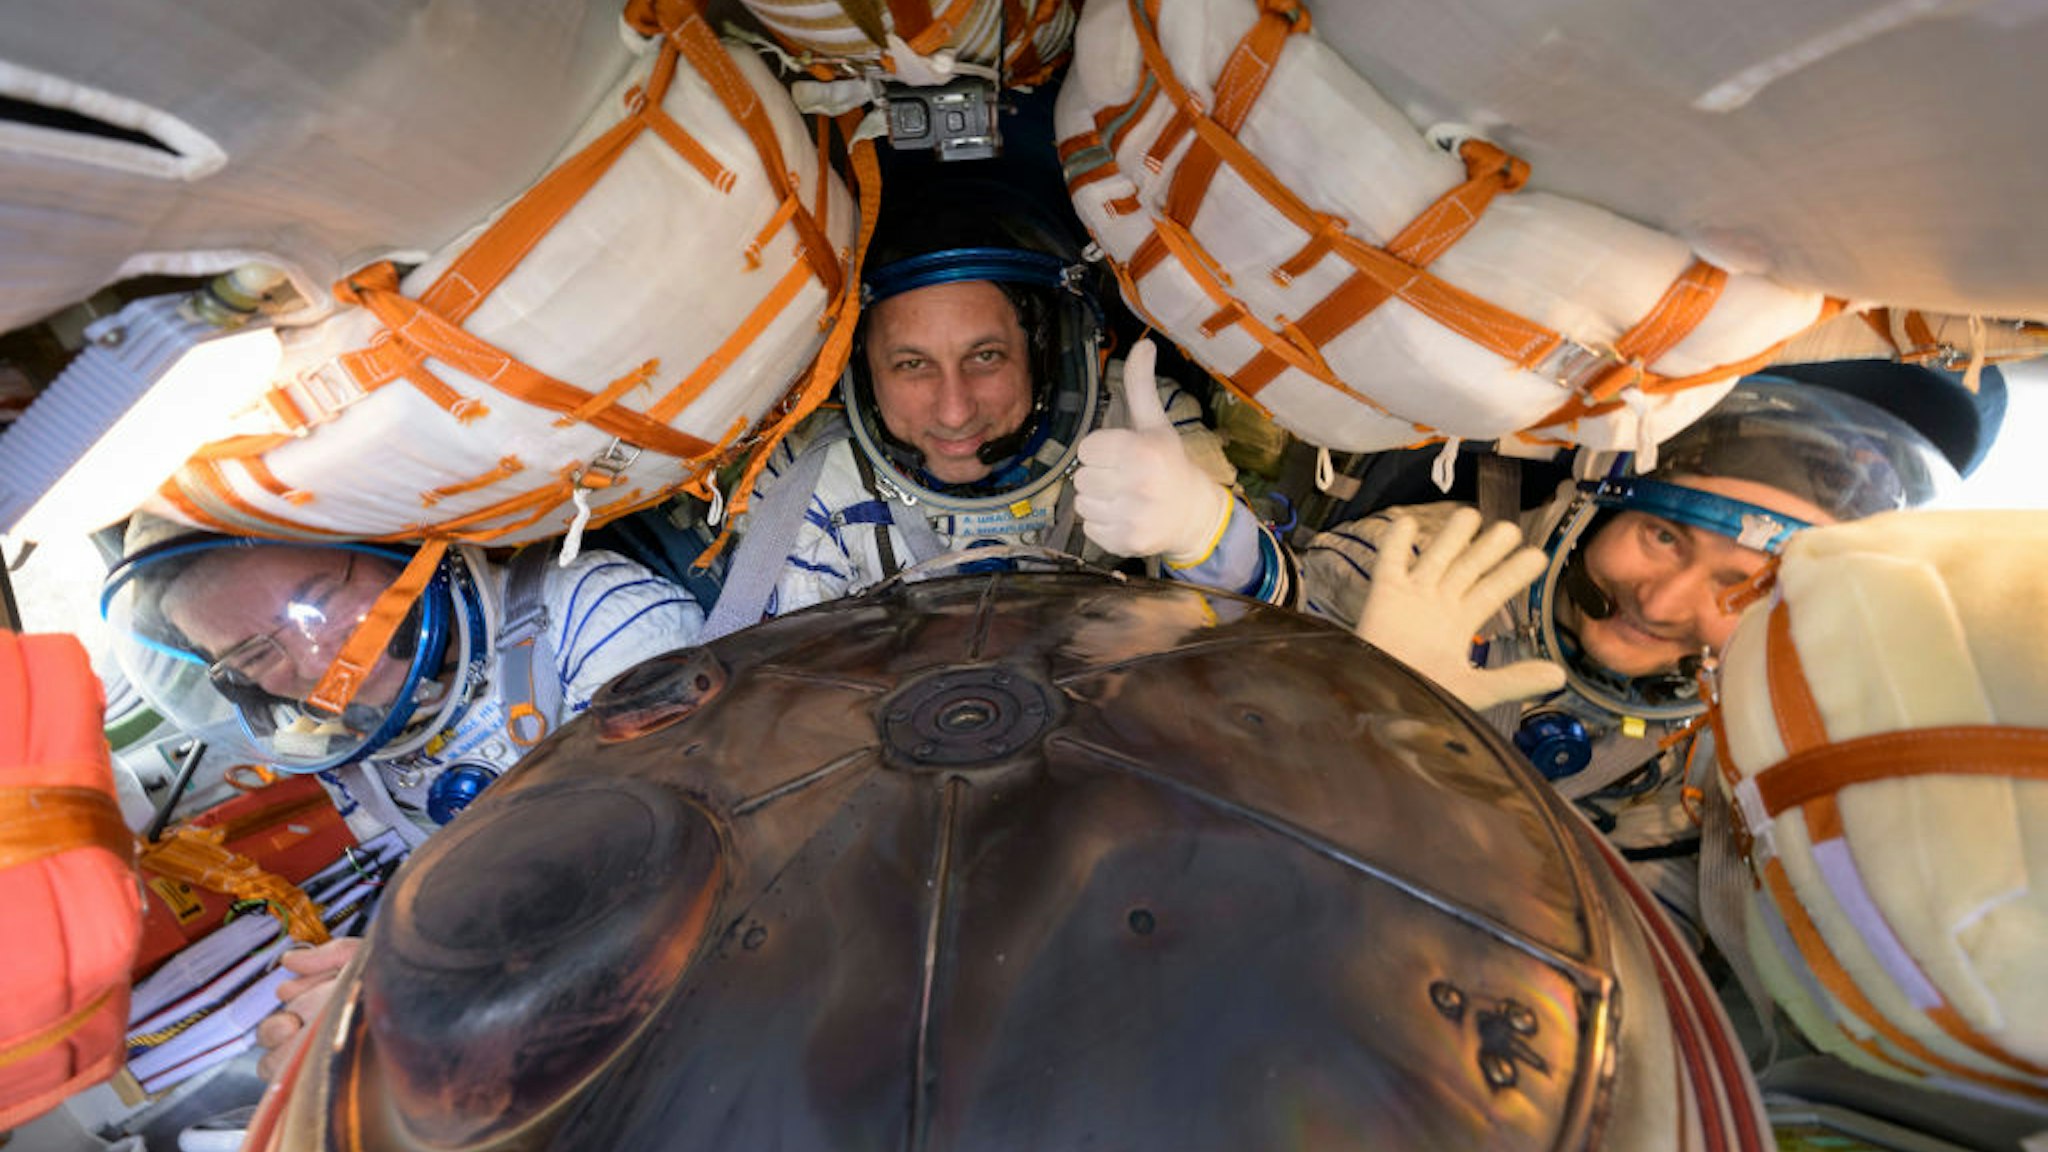 In this handout image provided by the U.S. National Aeronatics and Space Administration (NASA), Expedition 66 crew members (L-R) Mark Vande Hei of NASA, cosmonauts Anton Shkaplerov and Pyotr Dubrov of Roscosmos, are seen inside their Soyuz MS-19 spacecraft after is landed in a remote area near the town of Zhezkazgan on March 30, 2022 in Zhezkazgan, Kazakhstan.